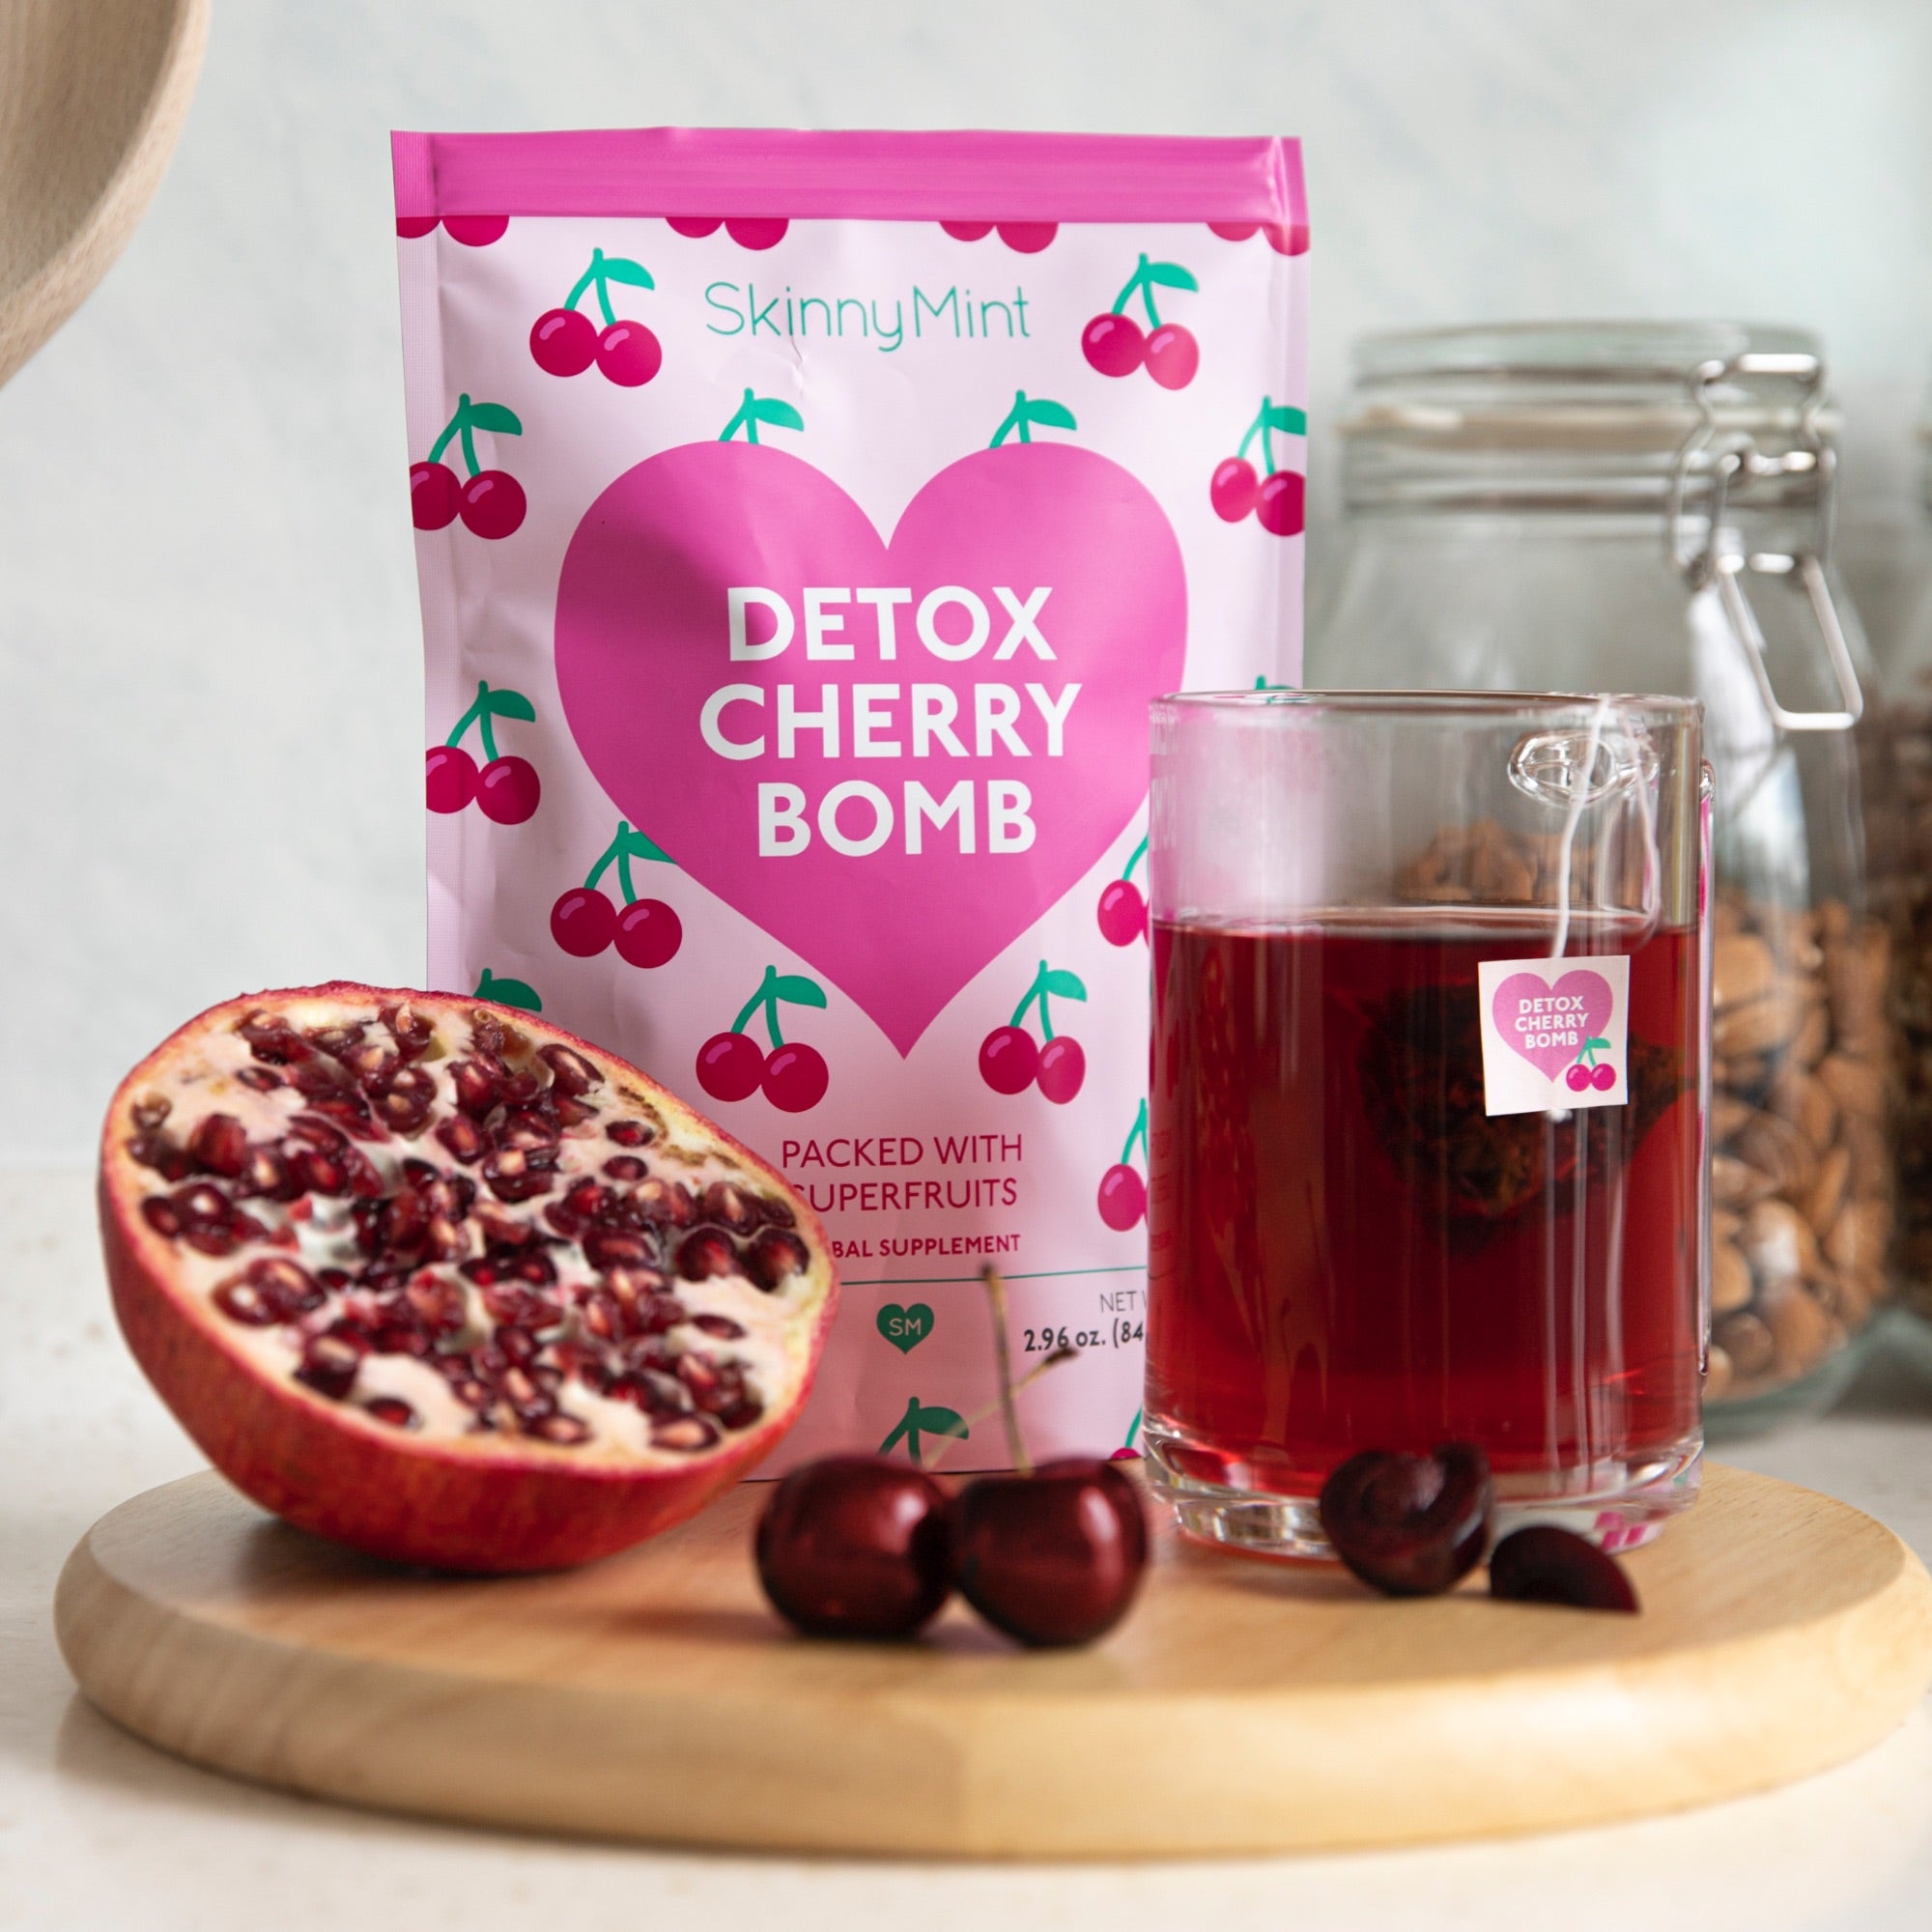 Detox Cherry Bomb with cherry and pomegranate